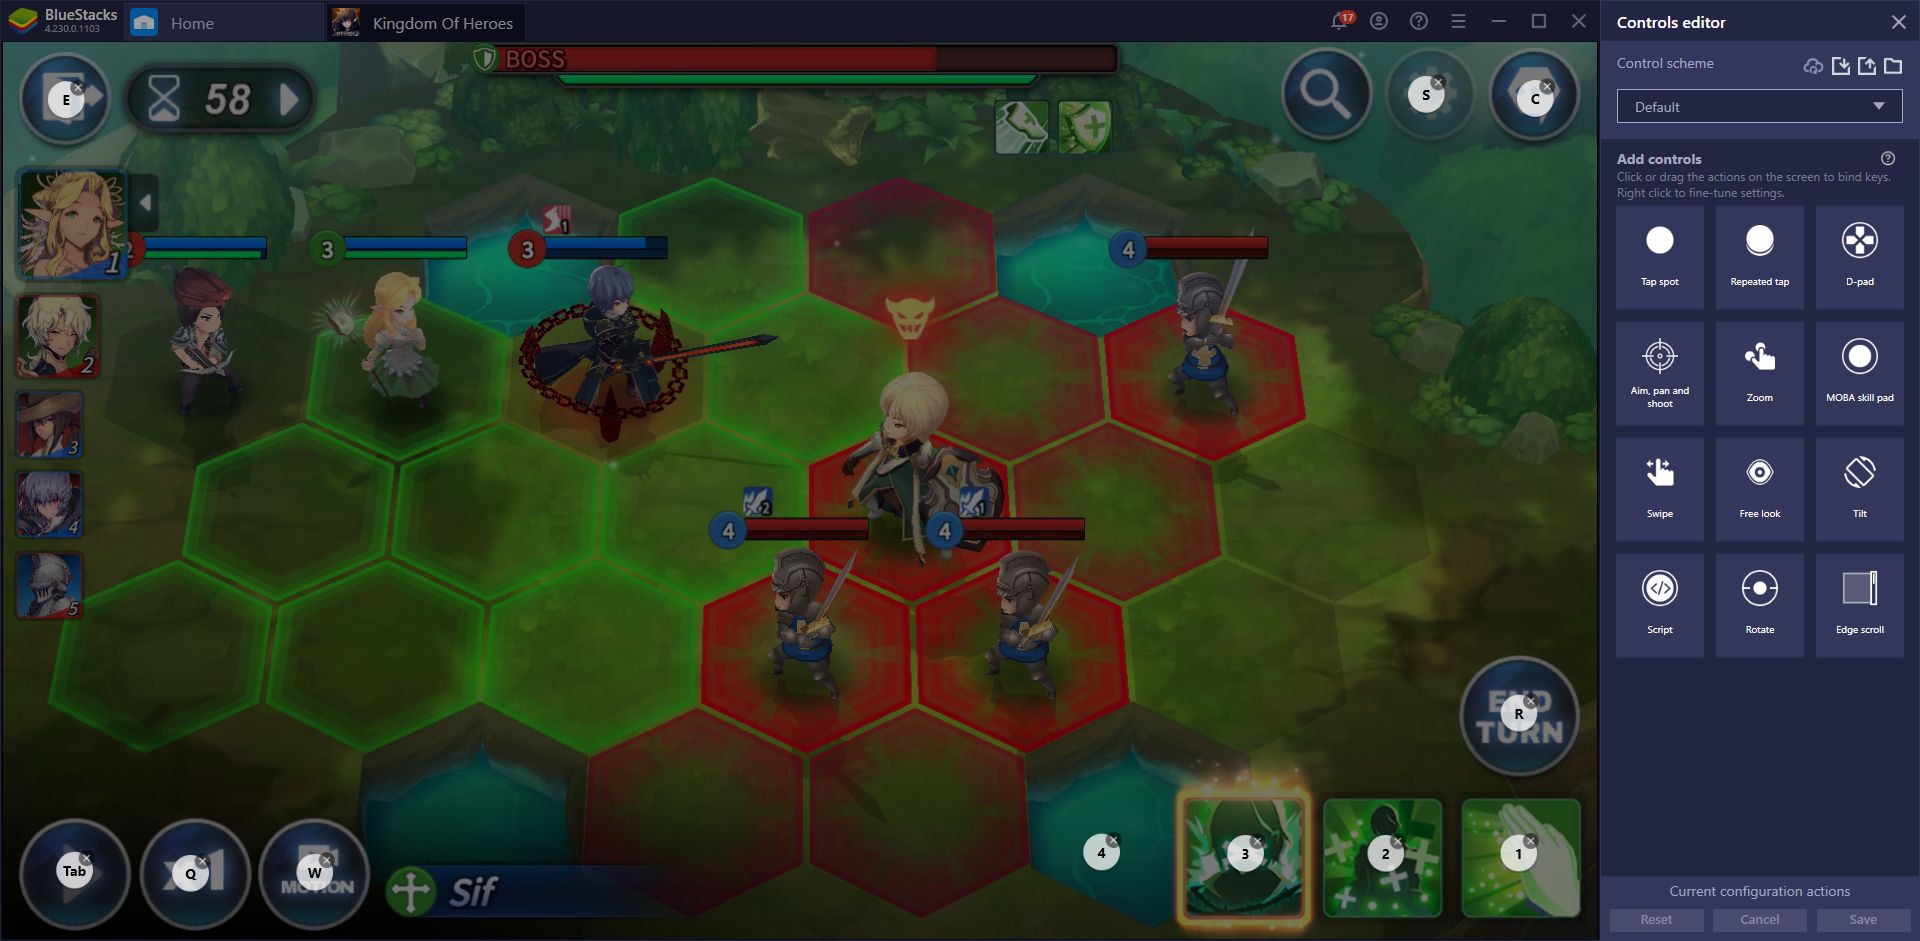 Kingdom of Heroes: Tactics War - How to Play This New Mobile Strategy Game on PC